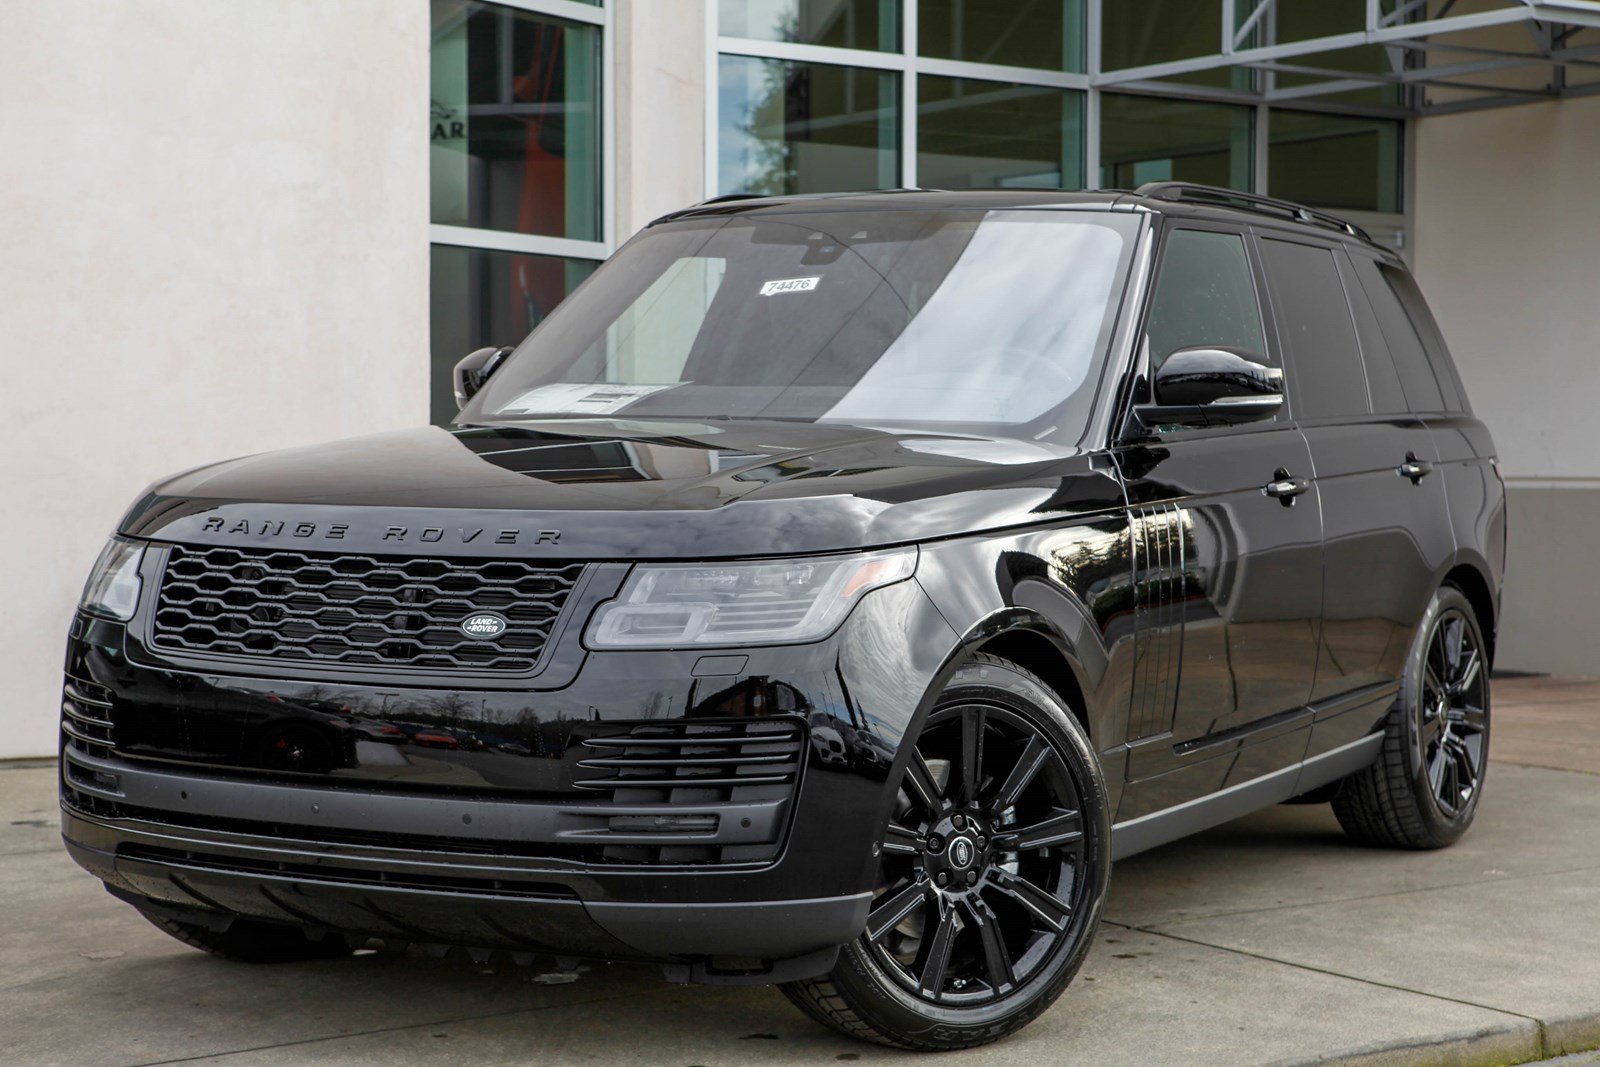 New 2019 Land Rover Range Rover HSE Sport Utility in Bellevue #74476